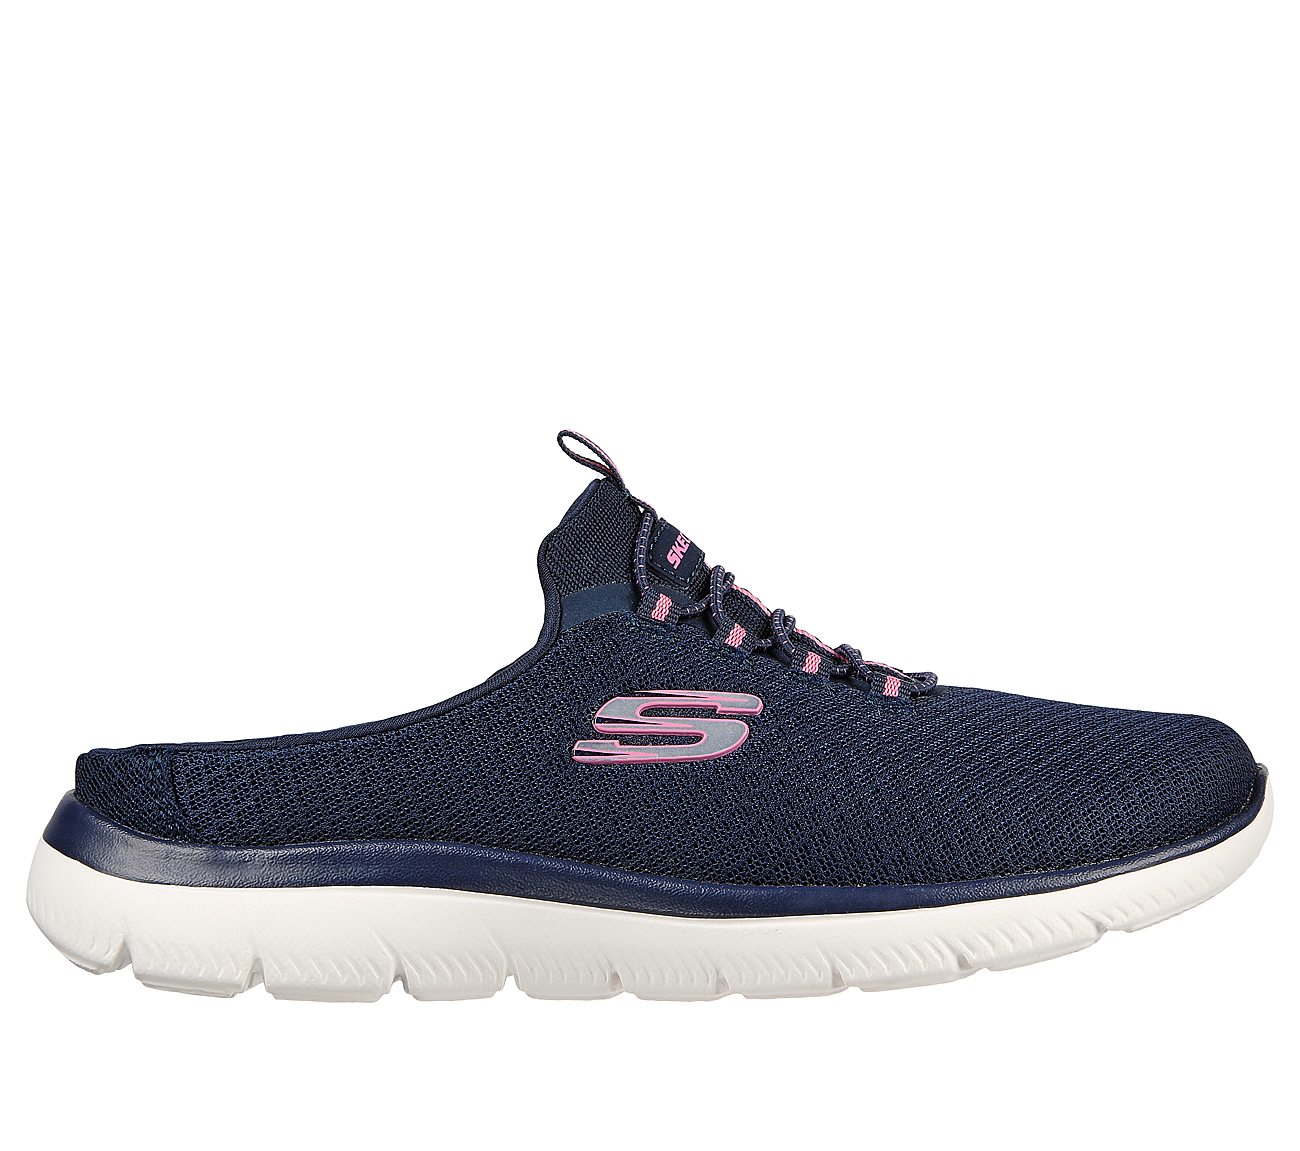 SUMMITS - SWIFT STEP, NAVY/HOT PINK Footwear Lateral View